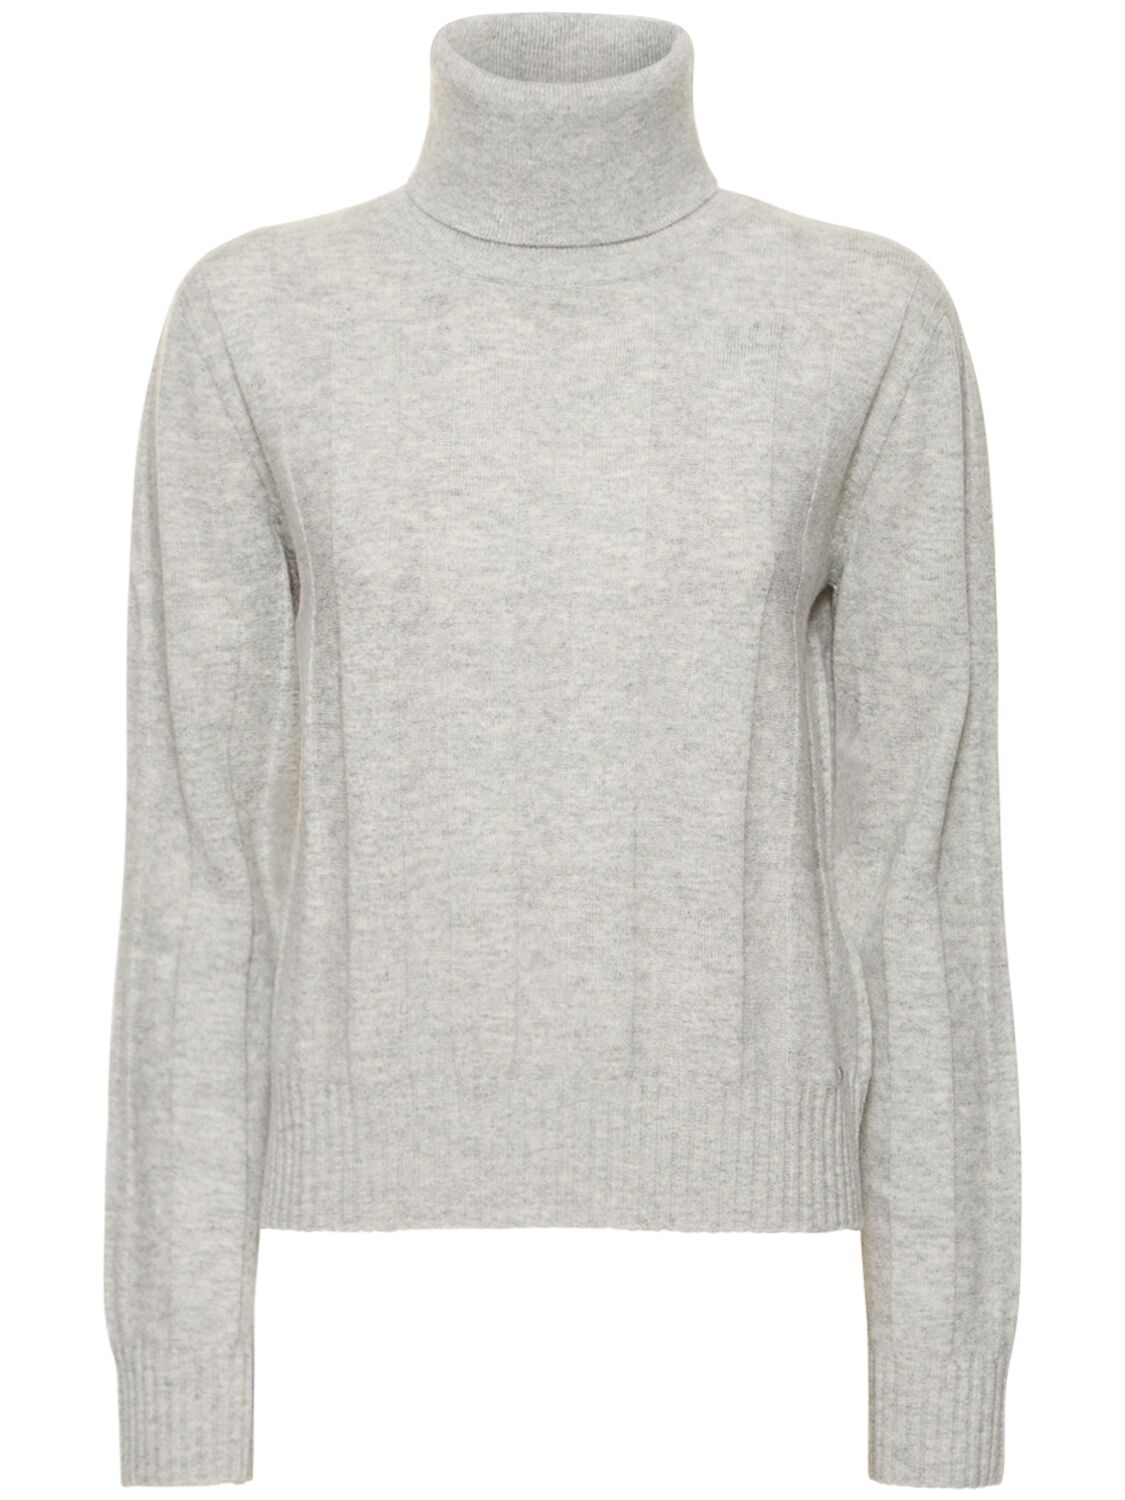 Image of Flamy Wool & Cashmere Sweater